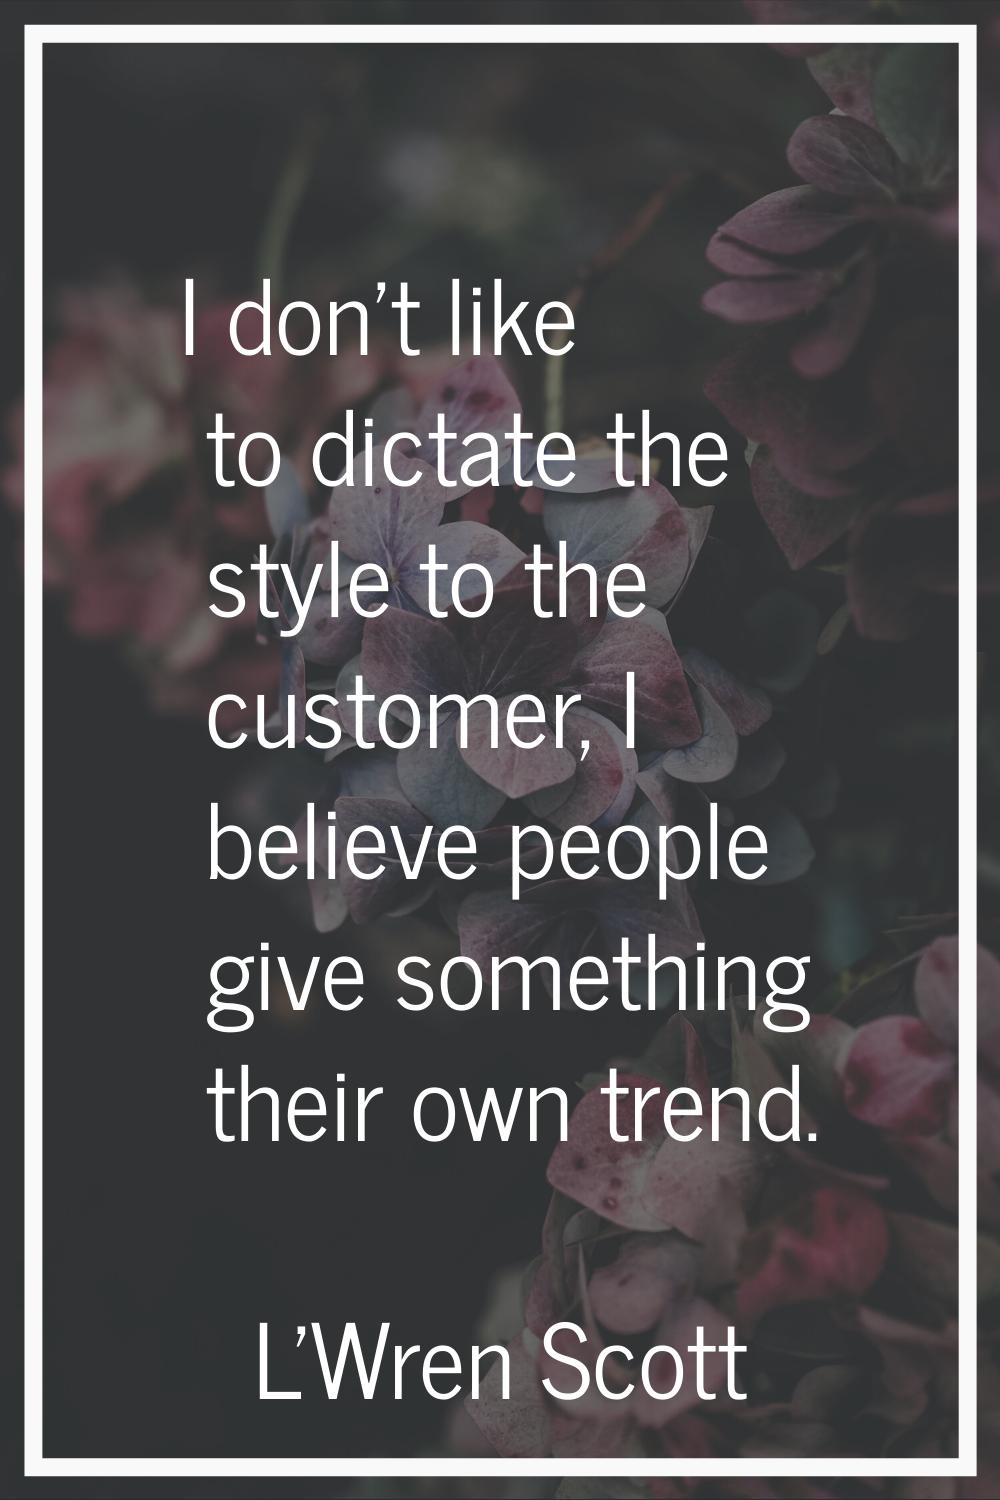 I don't like to dictate the style to the customer, I believe people give something their own trend.